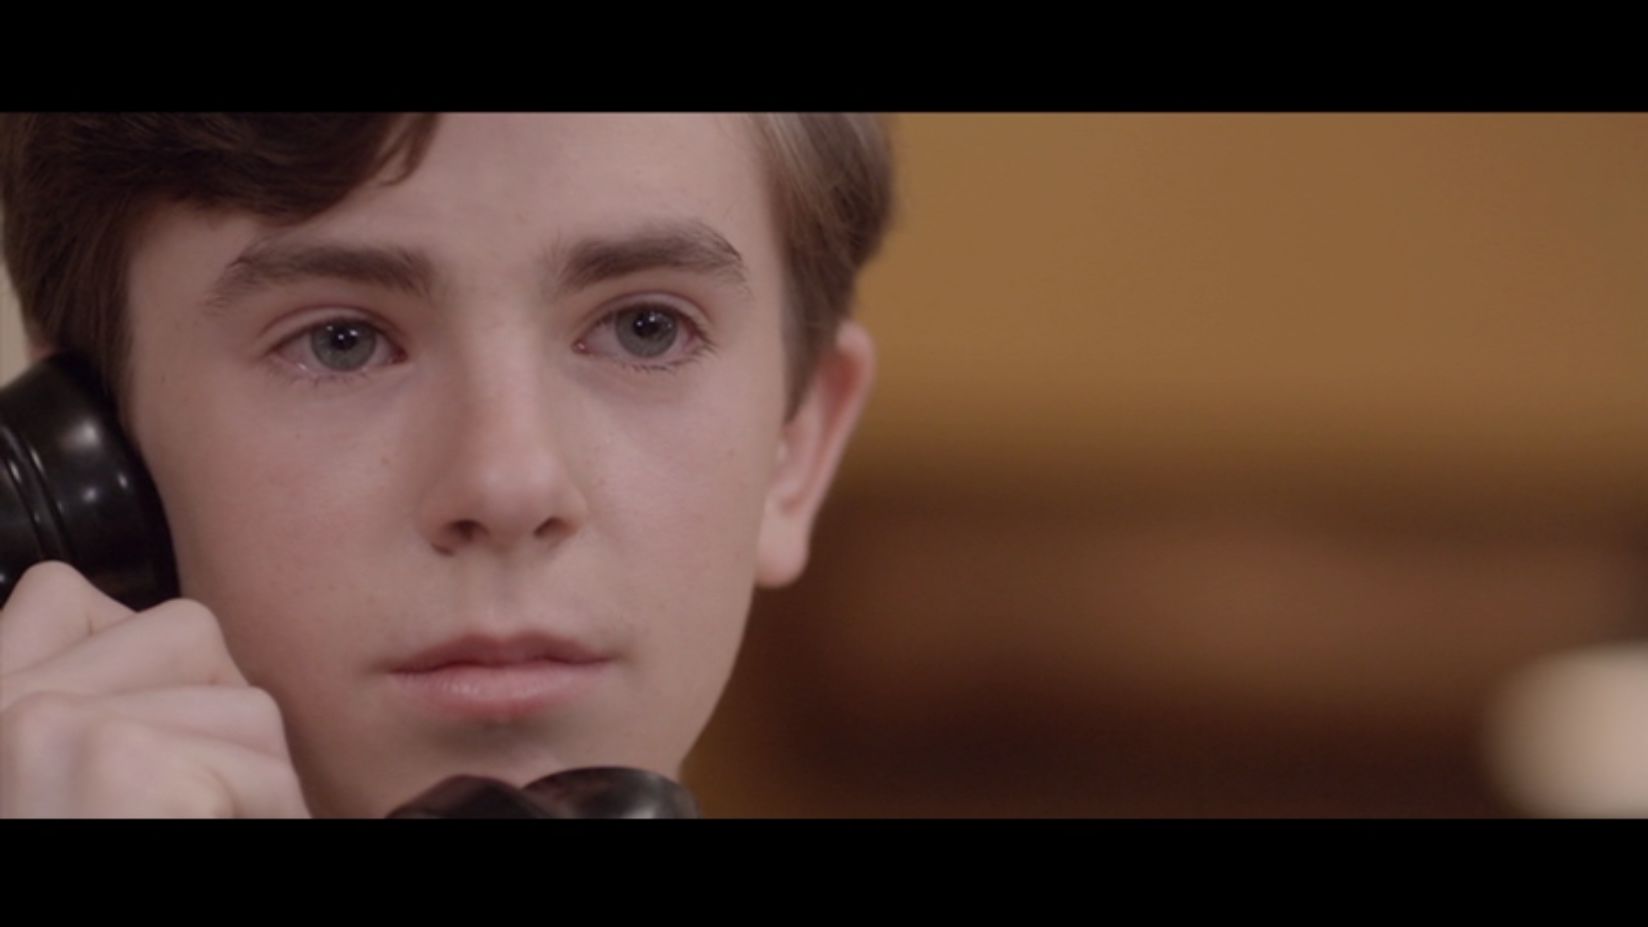 Freddie Highmore in Master Harold...and the Boys